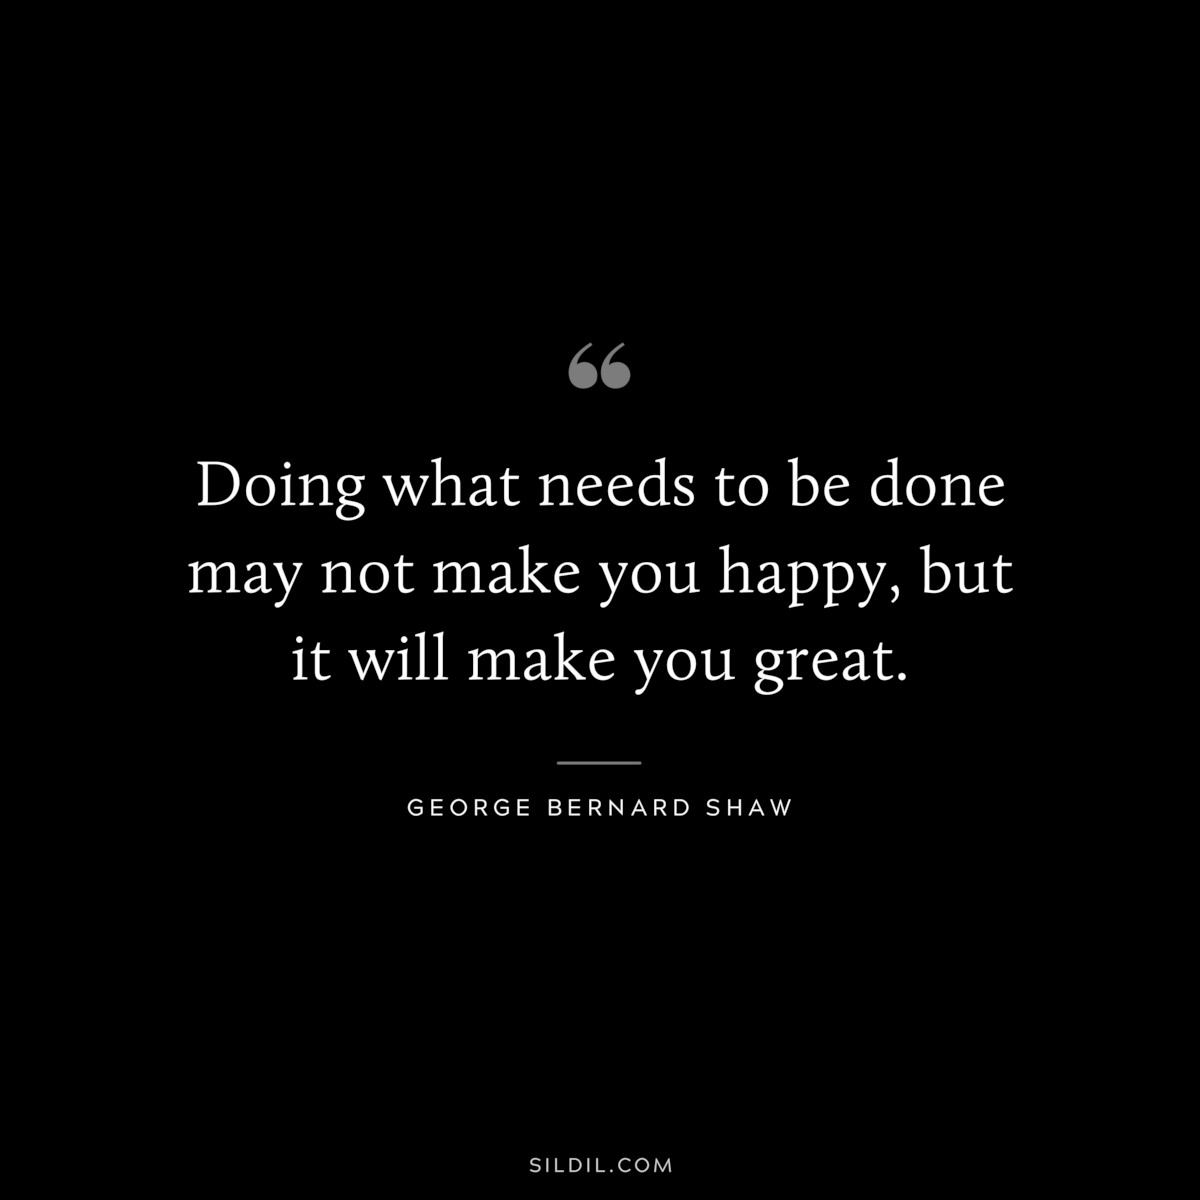 Doing what needs to be done may not make you happy, but it will make you great. ― George Bernard Shaw